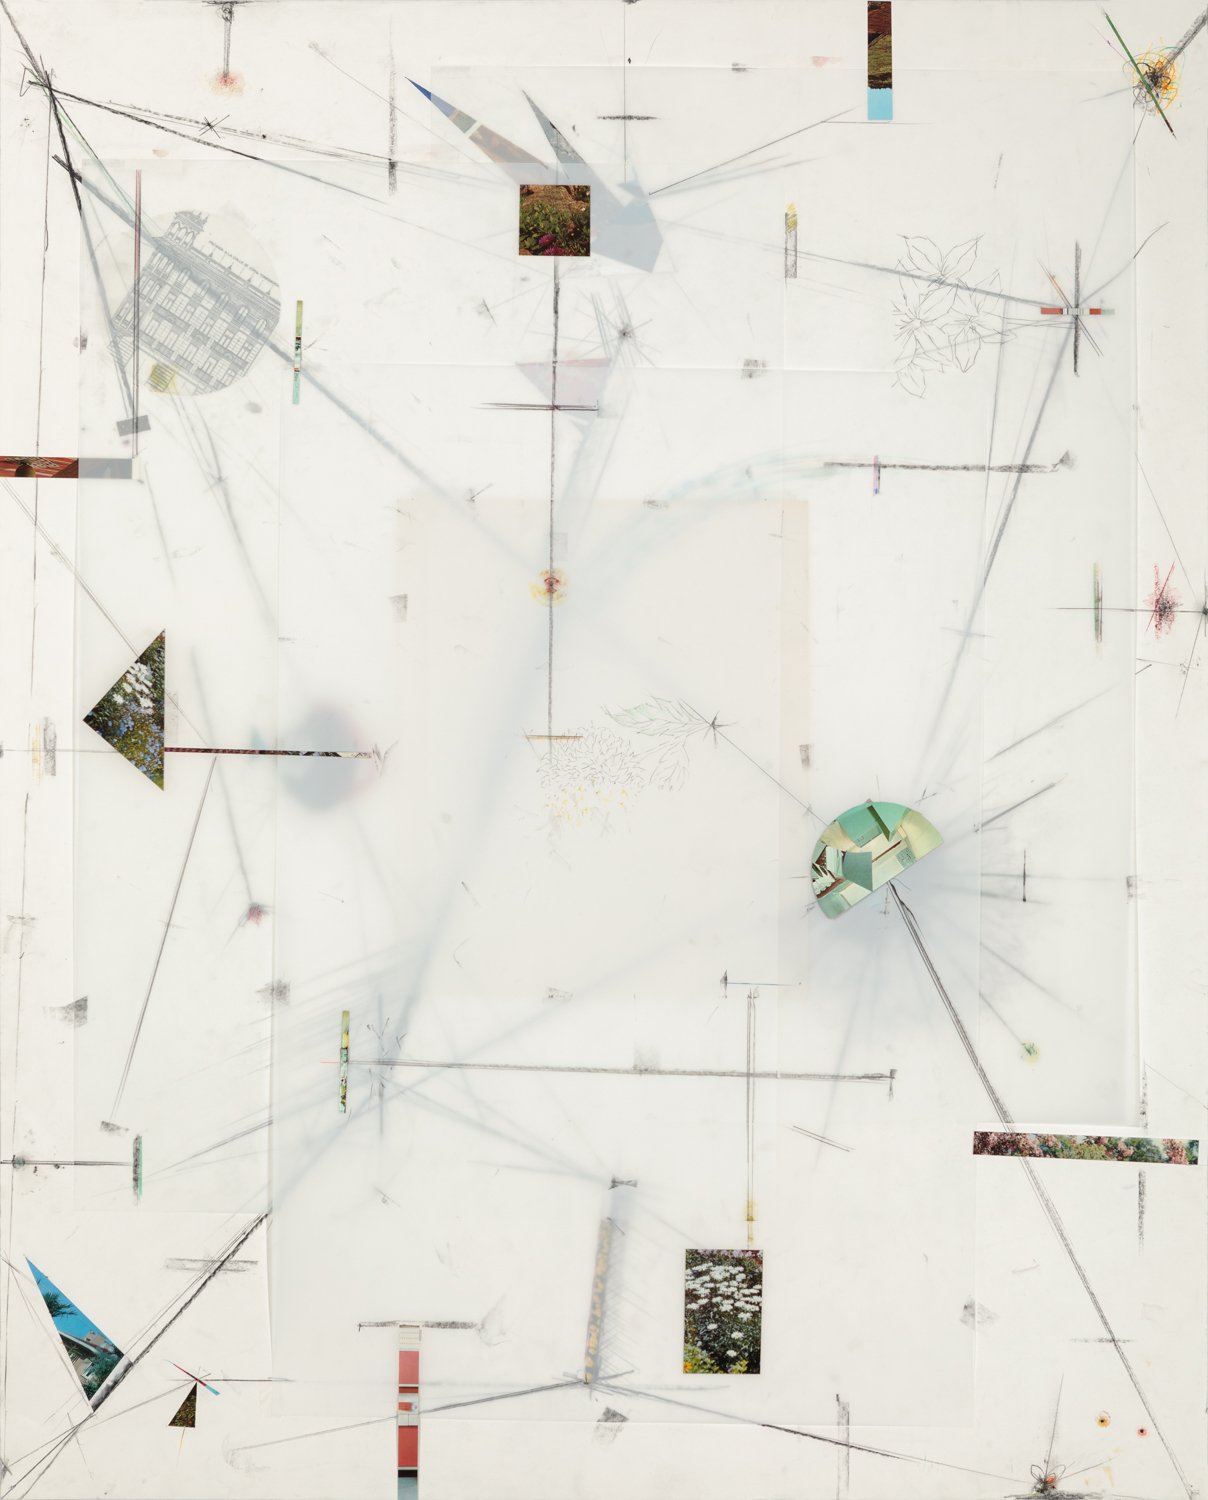  Untitled, 2021, graphite, colored pencil and collage on paper and mylar, 51,5 x 41,5 inches/ 131 x 105 cm 